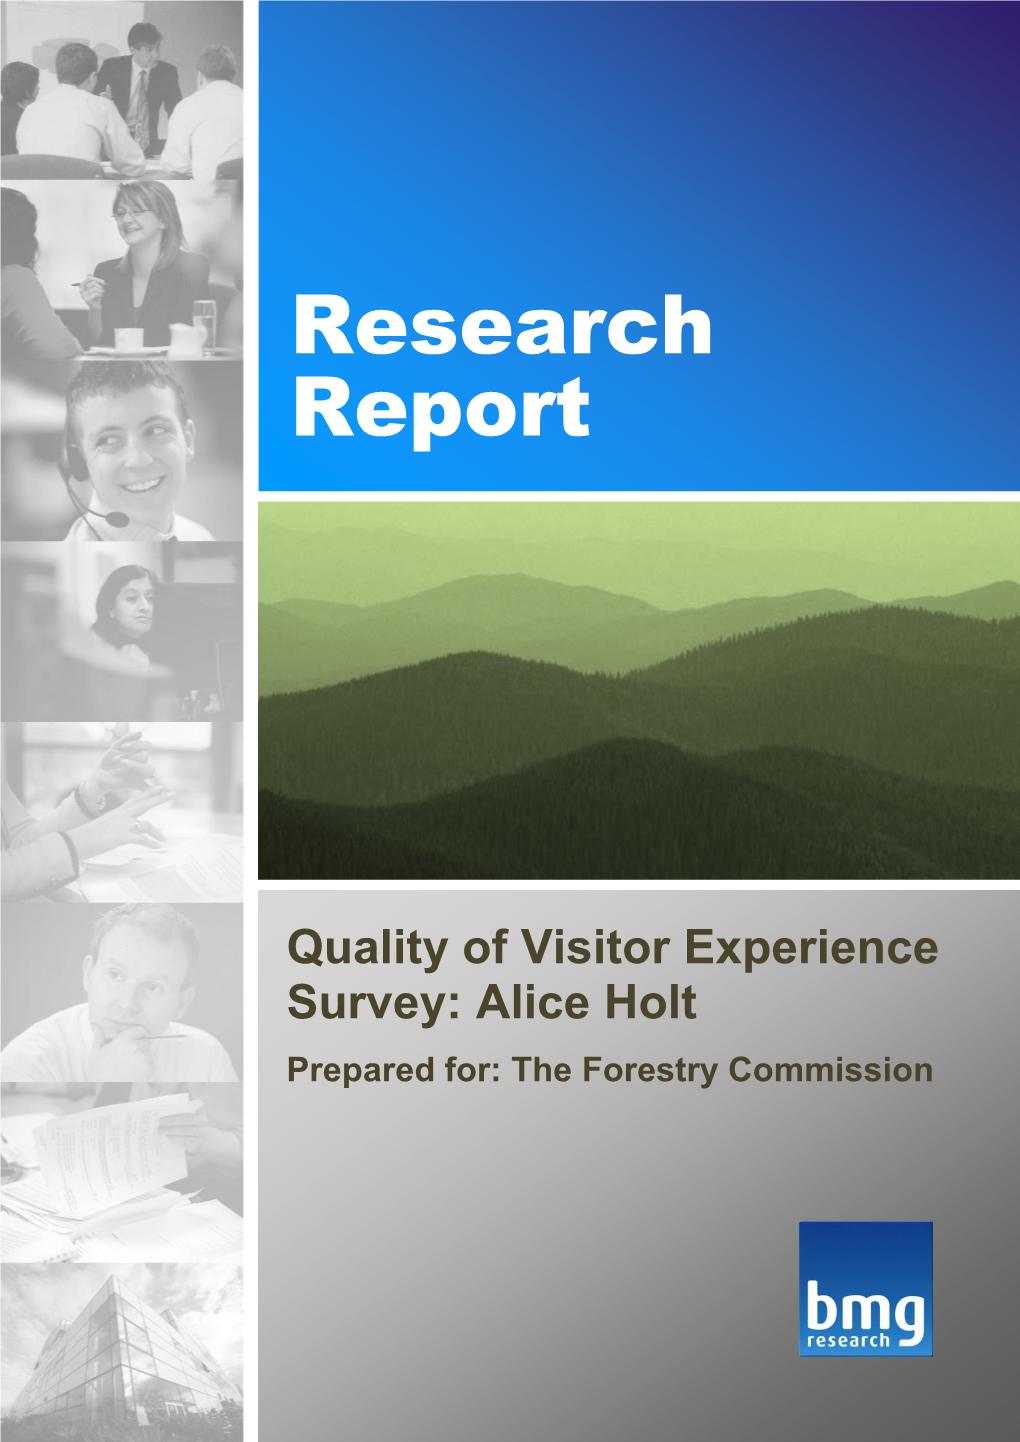 Quality of Visitor Experience Survey: Alice Holt